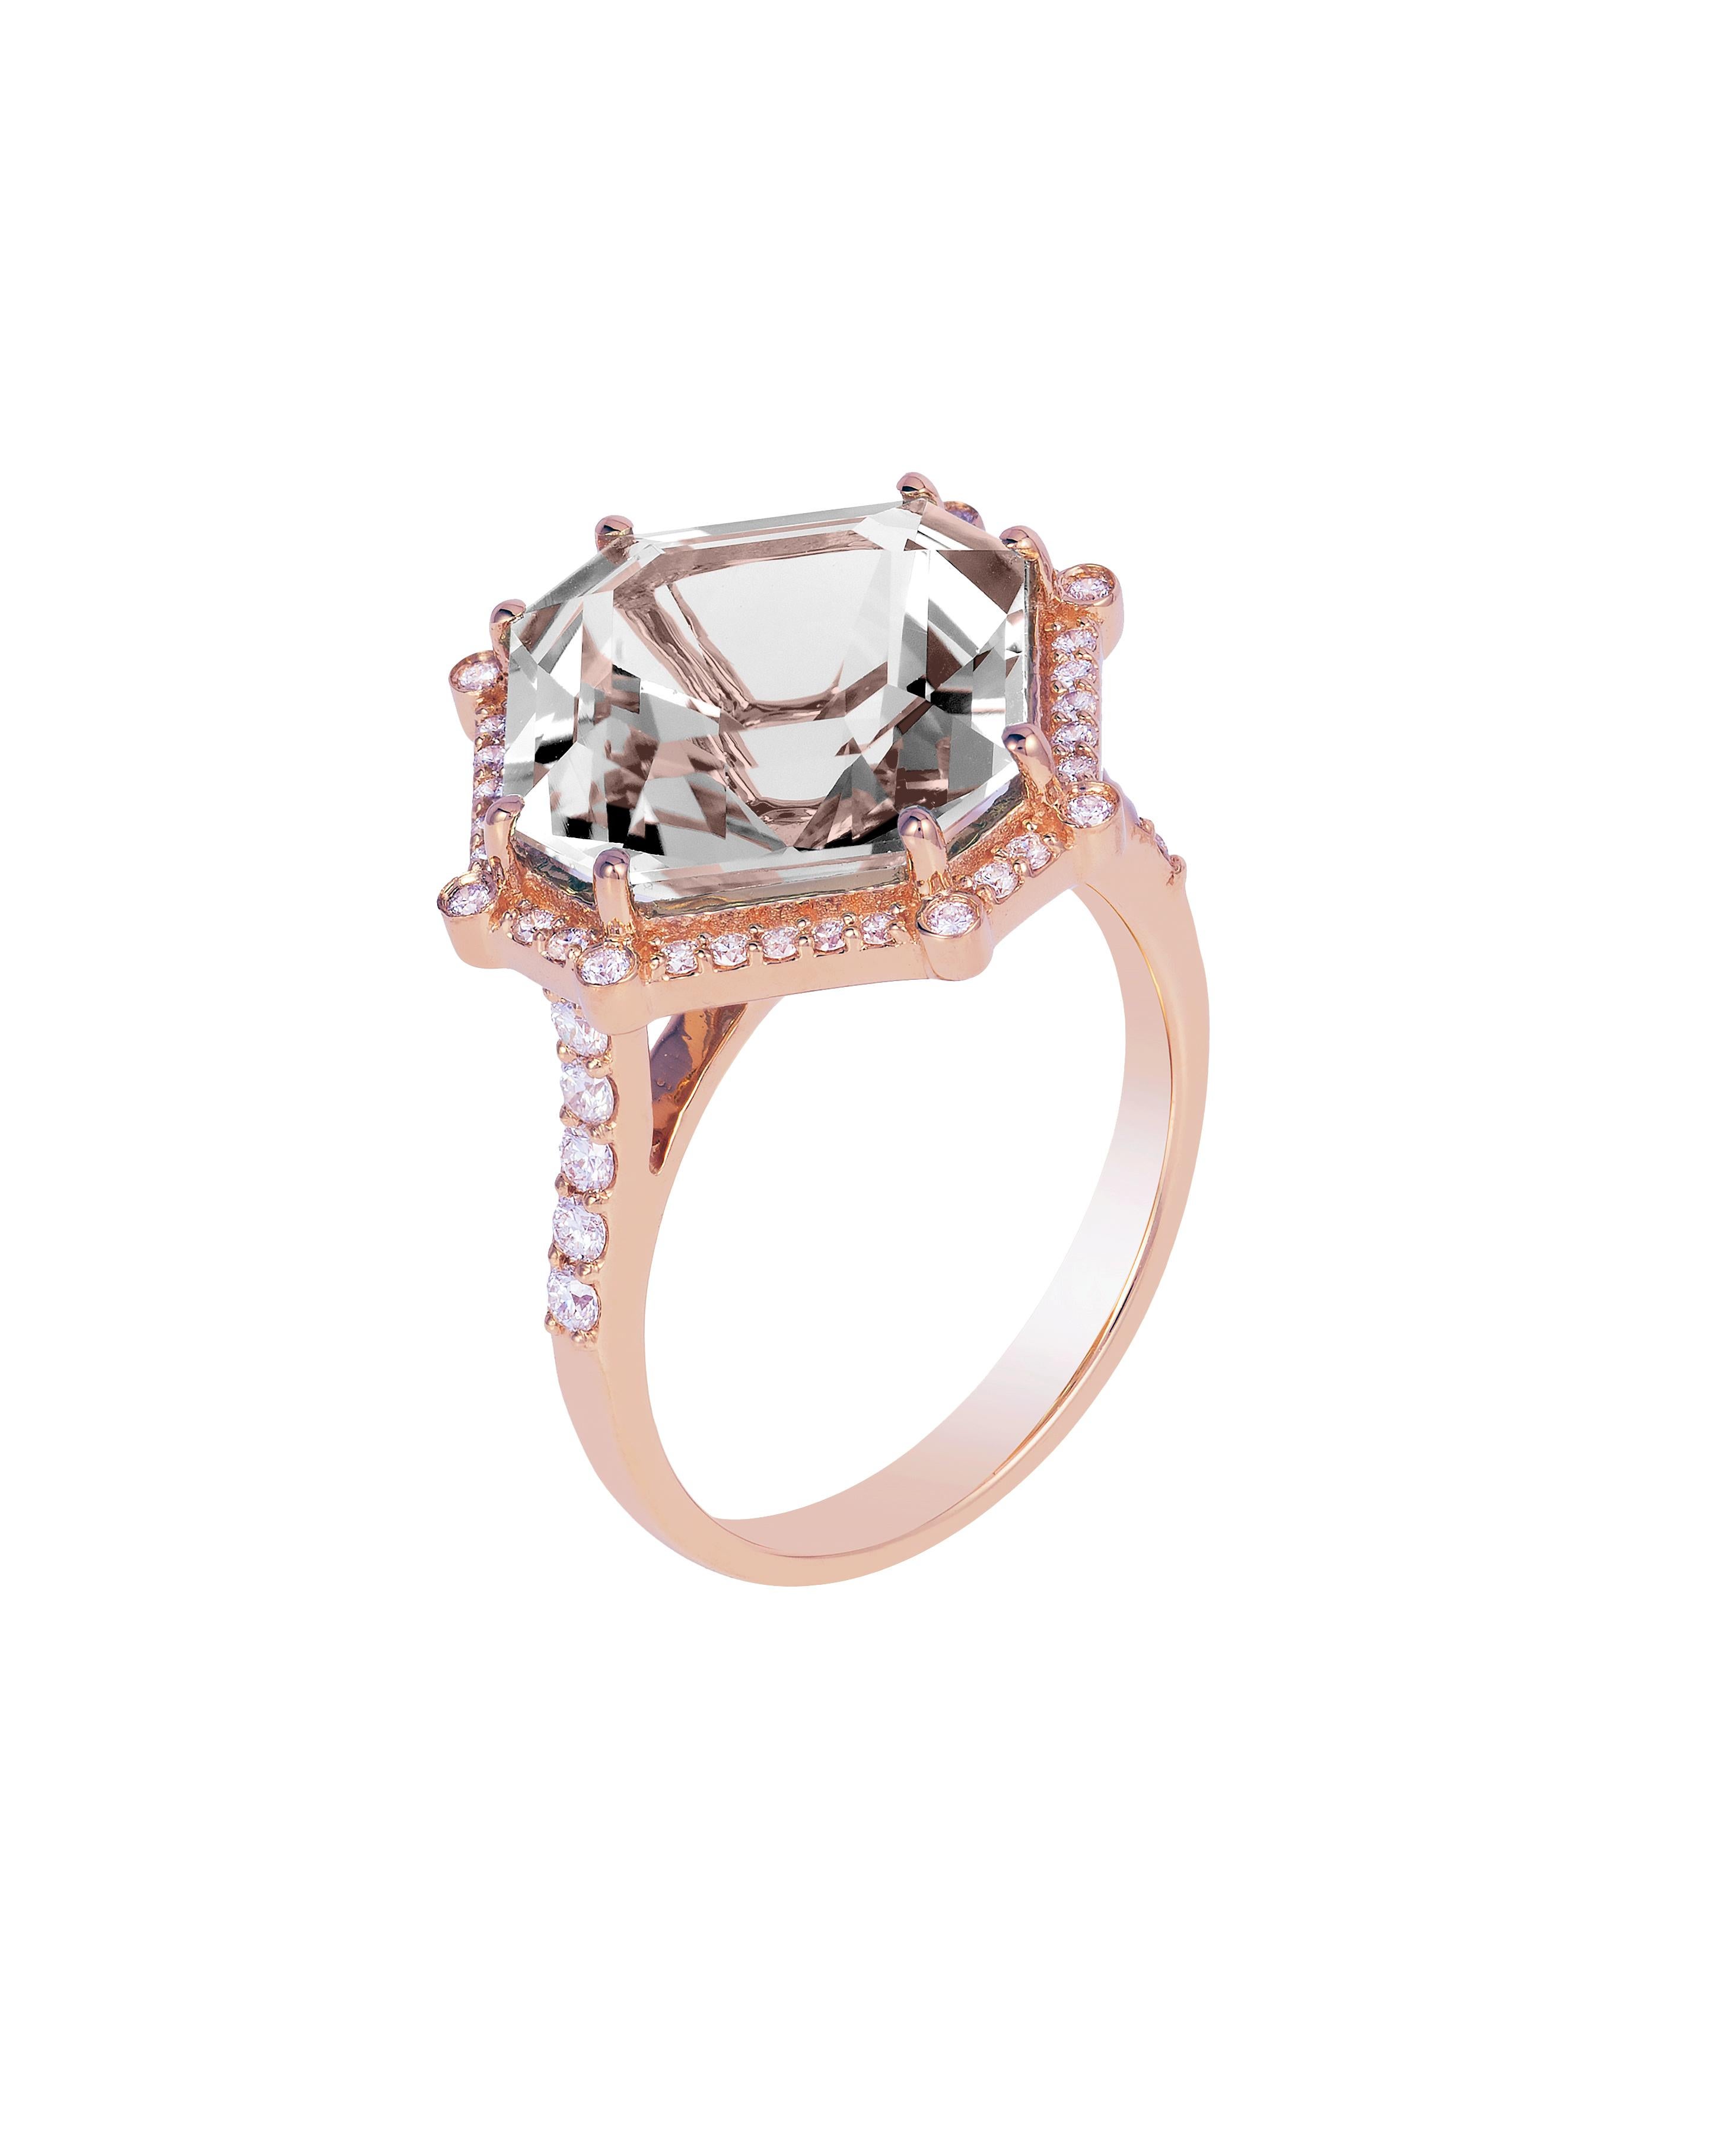 Rock Crystal Octagon Ring in 18K Rose Gold with Diamonds from 'Gossip' Collection

Stone Size: 12 x 12 mm 

Diamonds: G-H / VS, Approx Wt:0.36 Cts